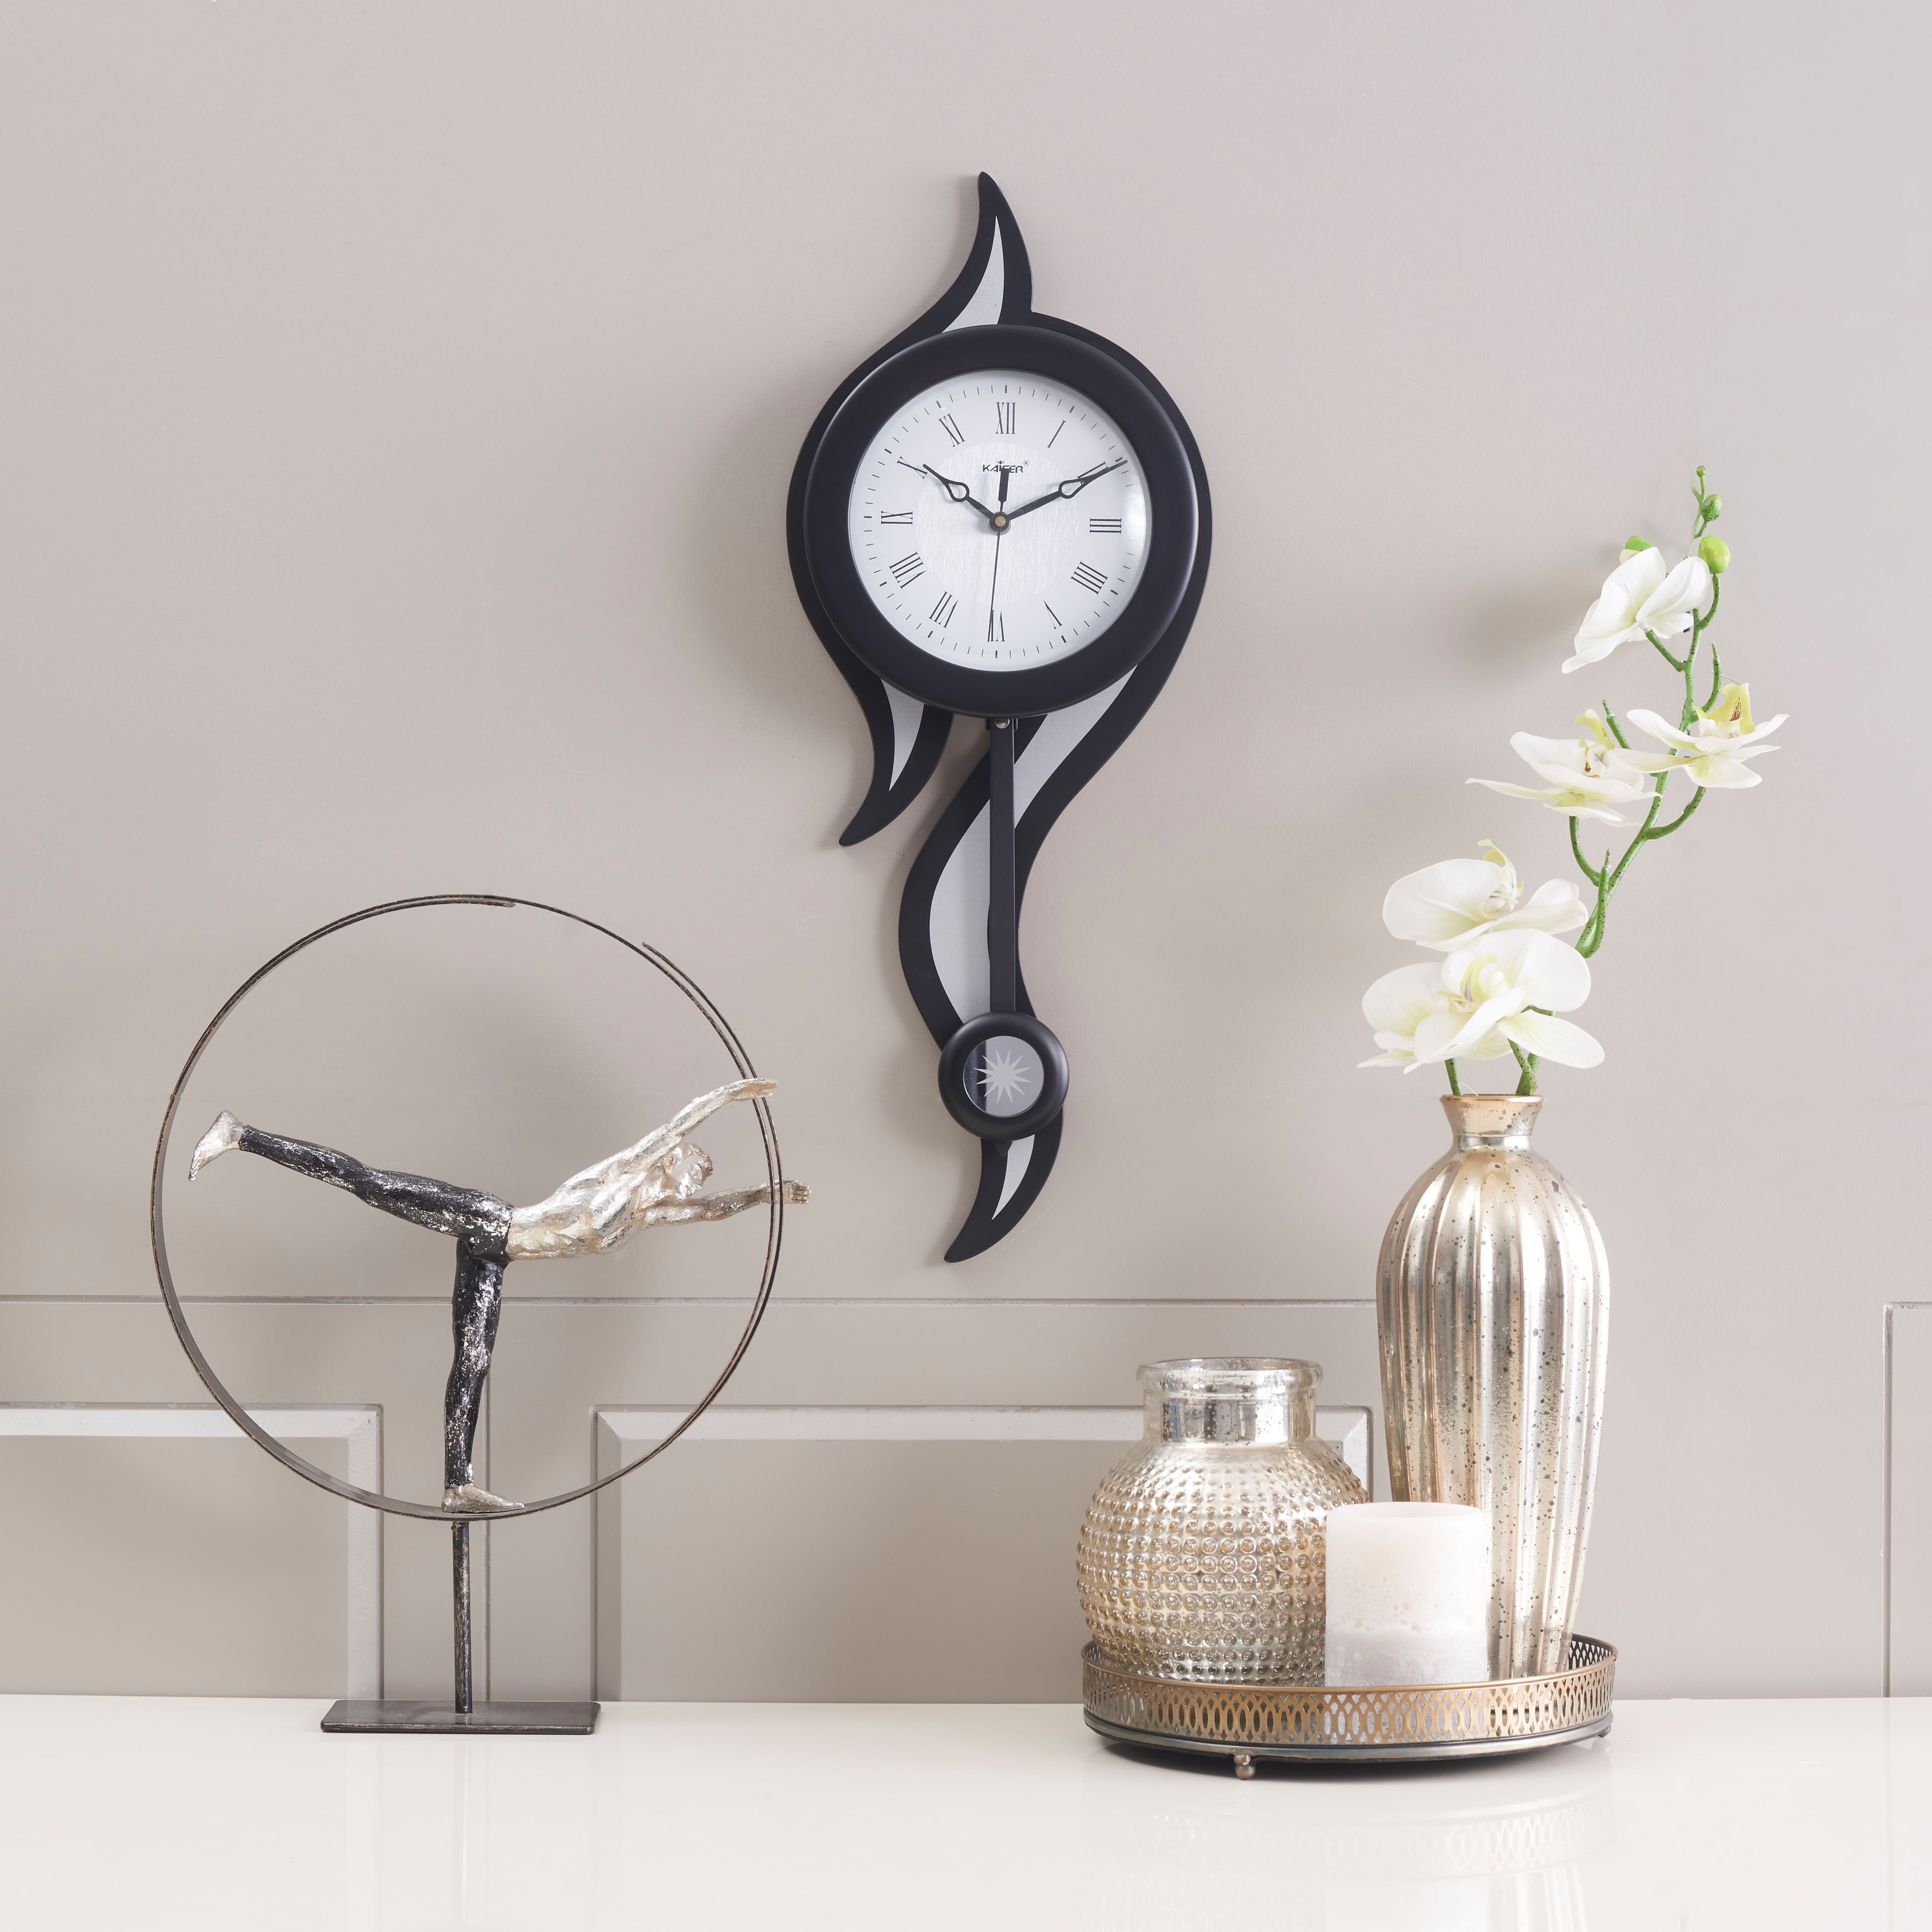 Wooden Wall Clock in Black Colour by Kaiser